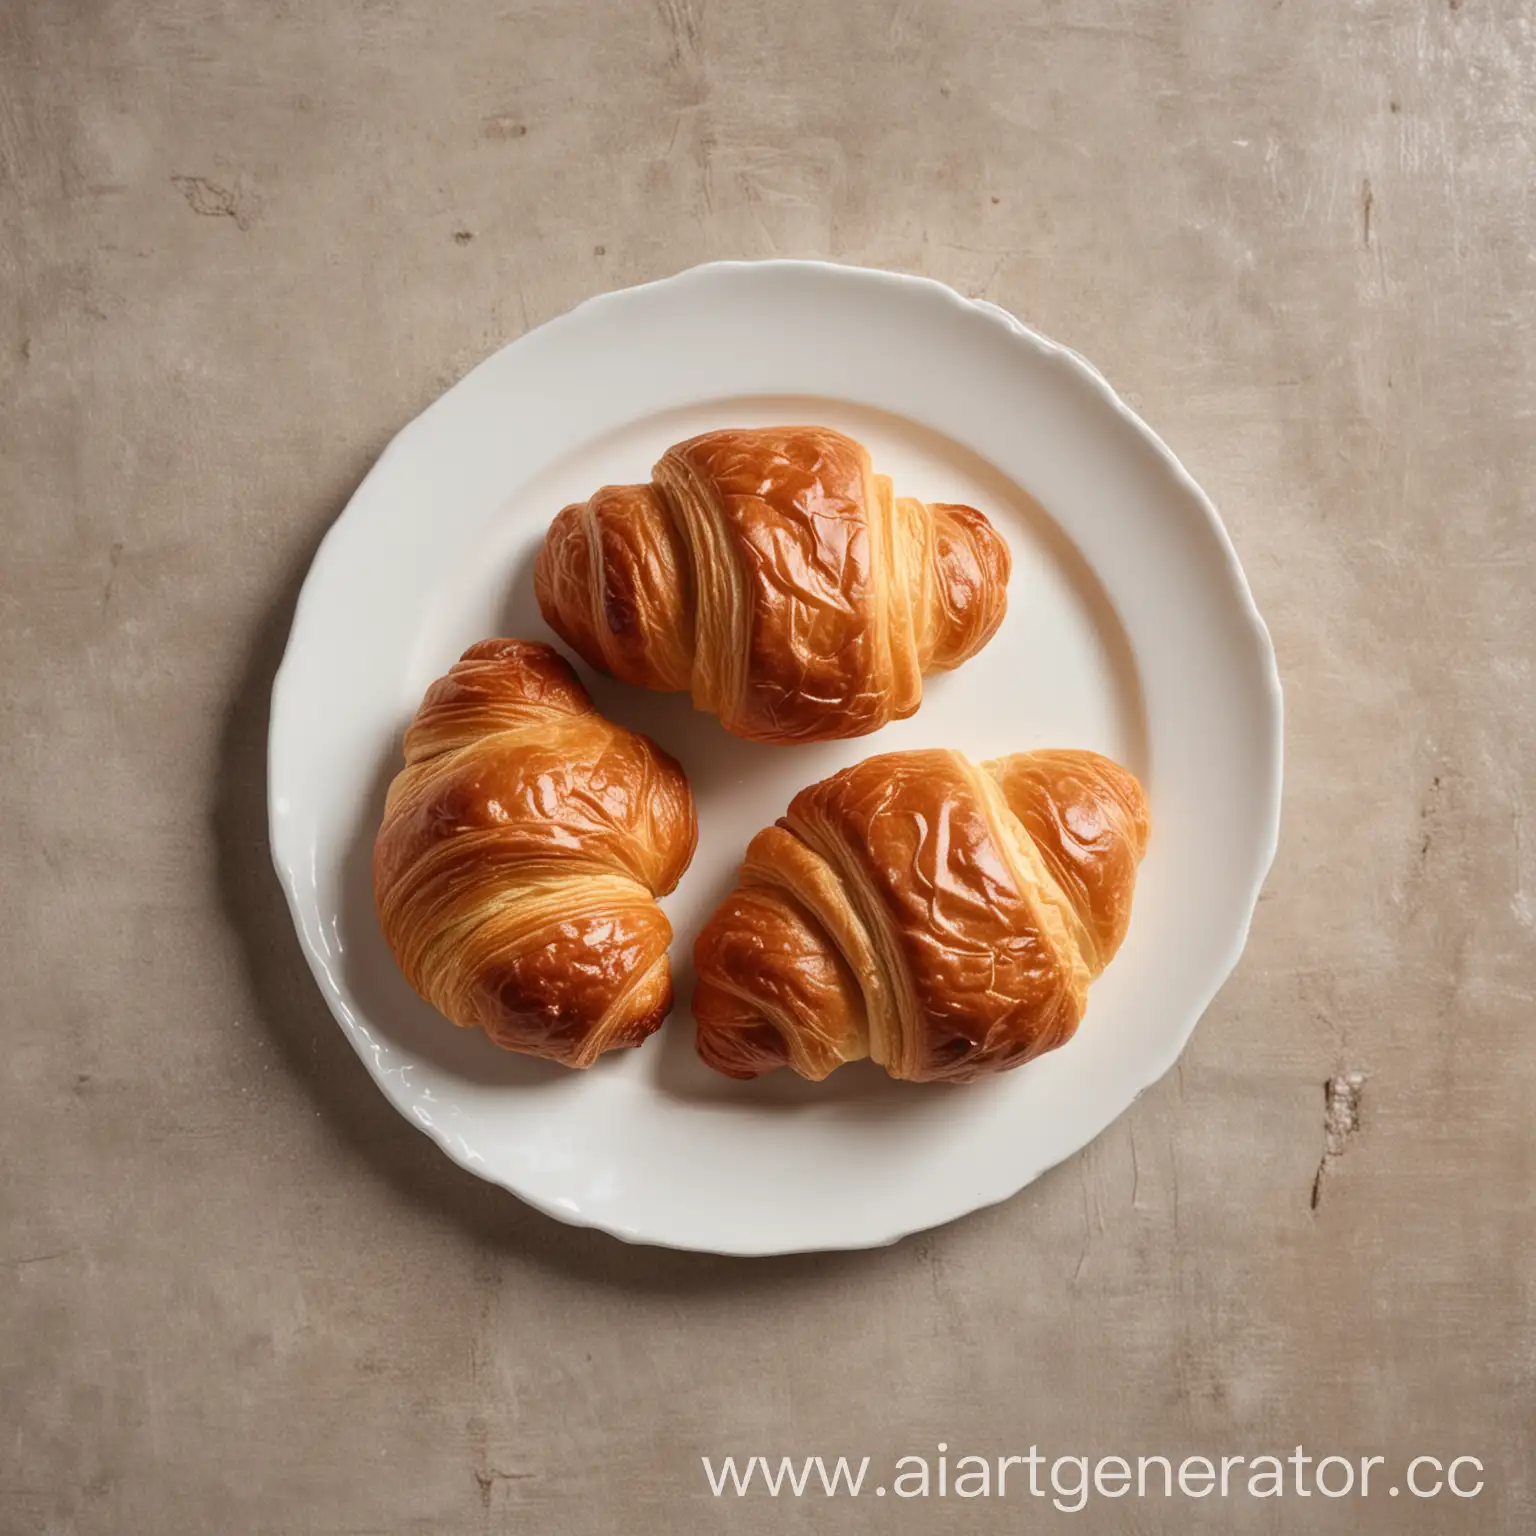 Fashionable-Croissants-on-White-Plate-Stylish-Pastries-Overhead-View